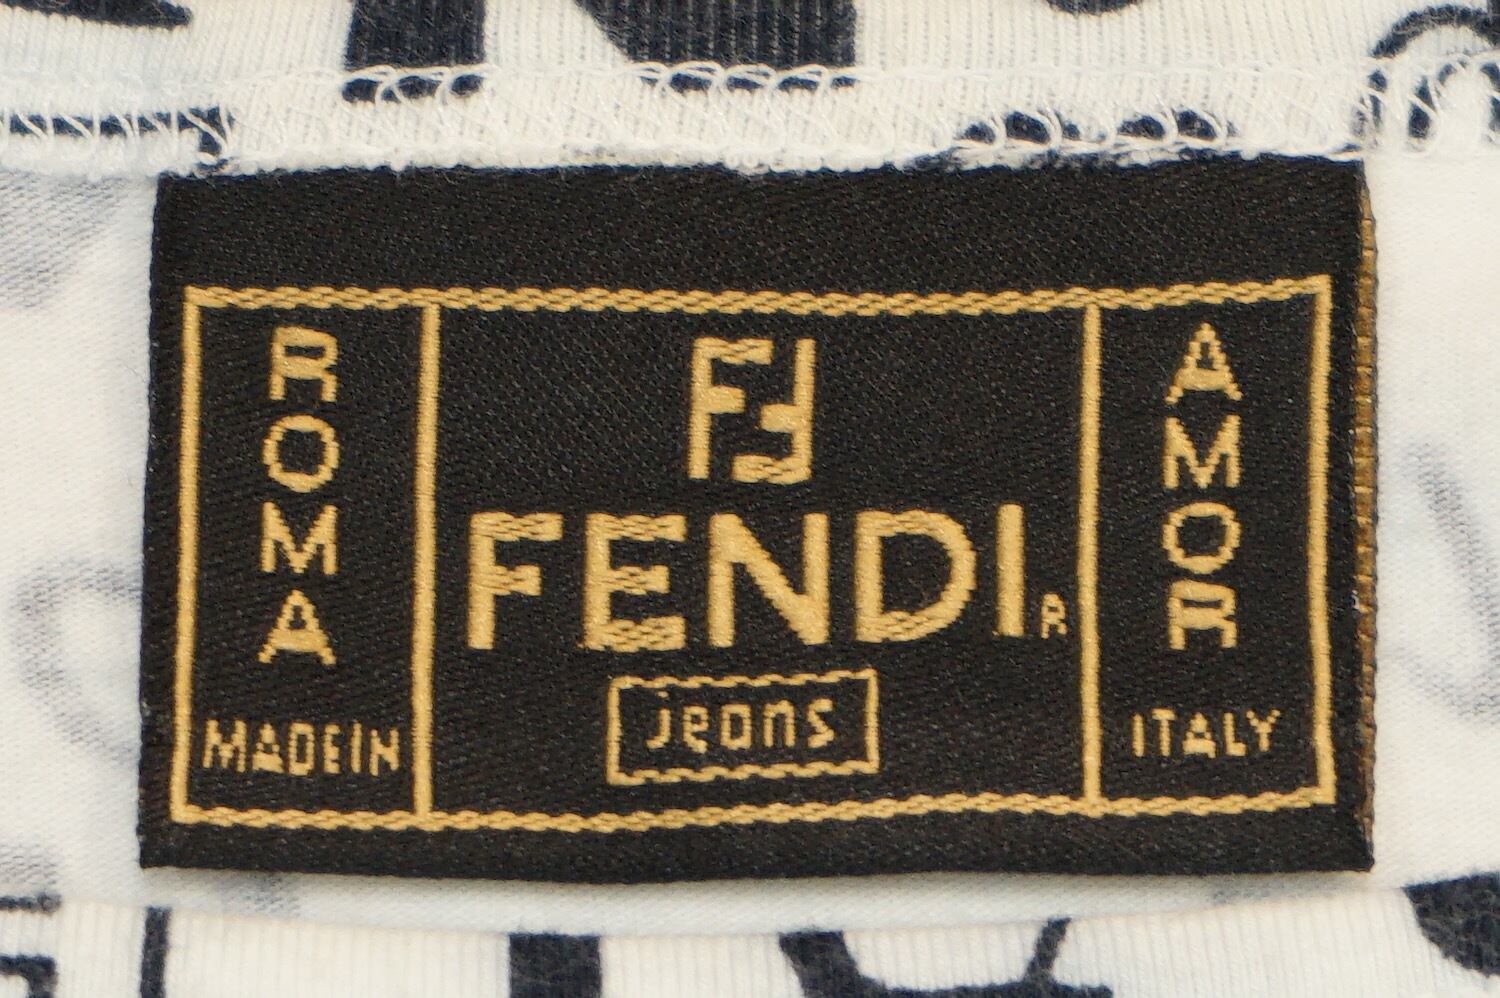 2721R2 FENDI jeans フェンディ MADE IN ITALY Tシャツ カットソー レディース古着 | ANTIQUE JOHN  アンティーク ジョン powered by BASE